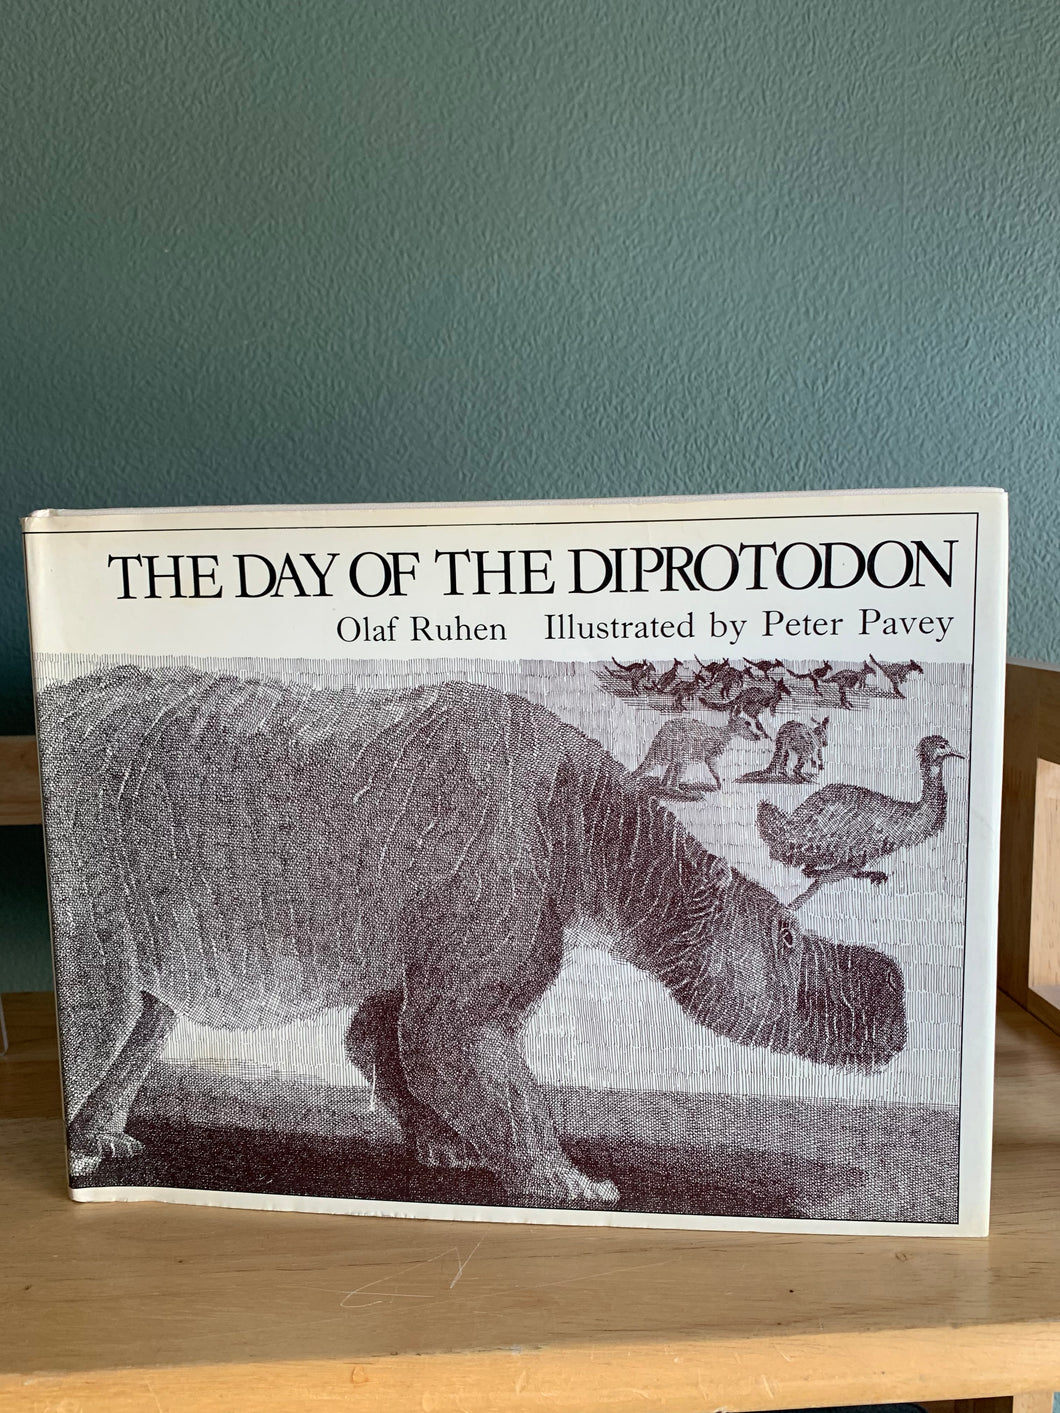 The Day of the Diprotodon